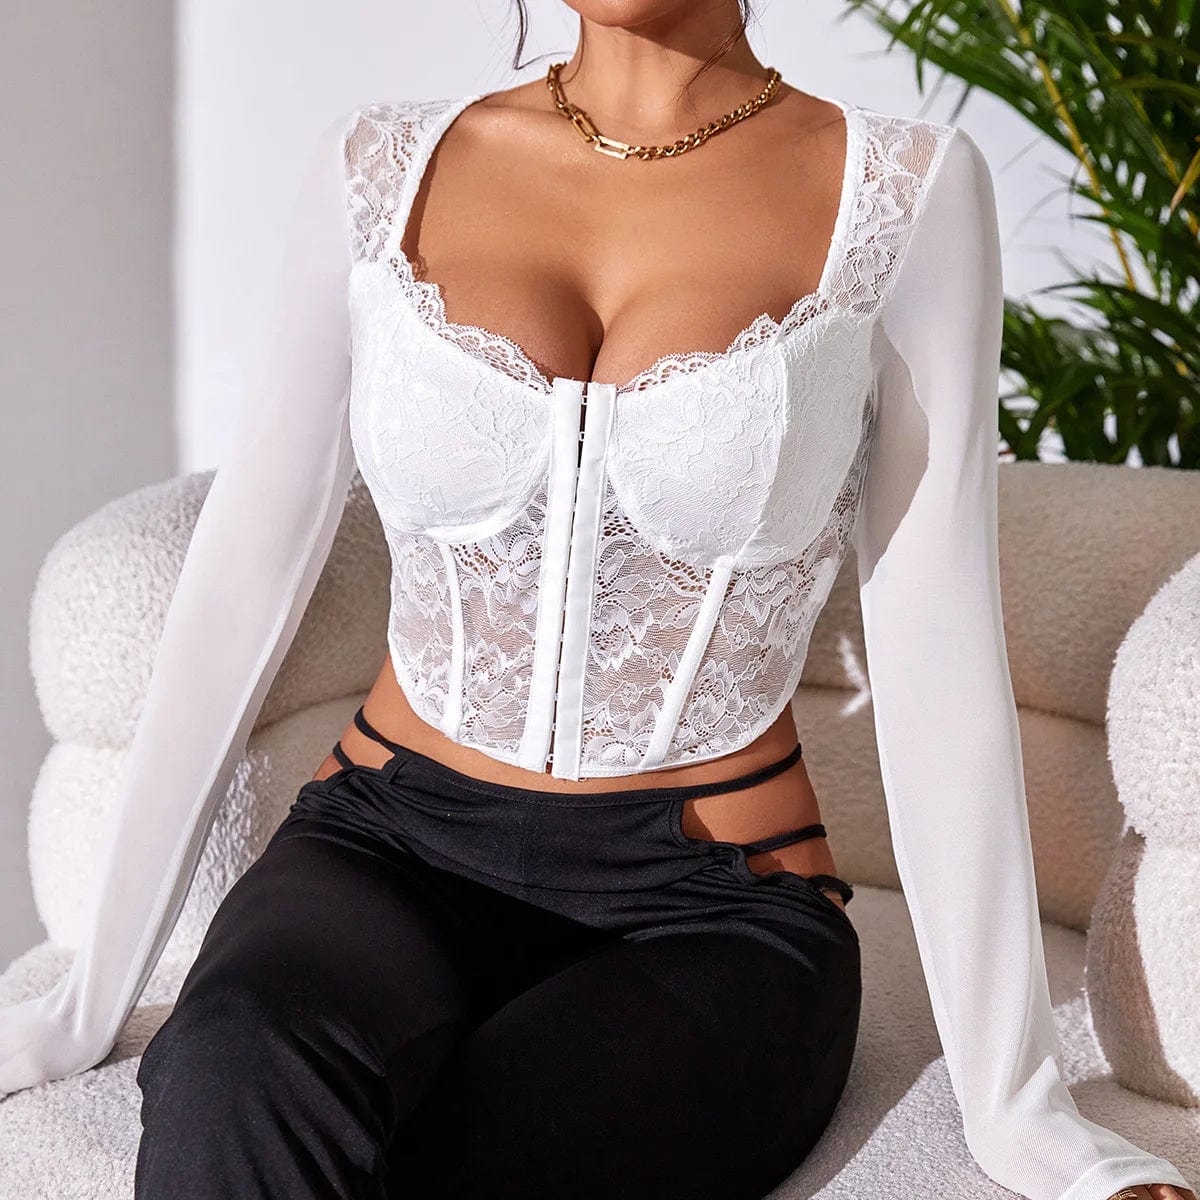 White / S Vemina Selection of Autumn Backless Sexy Lace Long Sleeve Women Blouse,Black Embroidery Floral Bare Shoulder Bodycon Crop Top